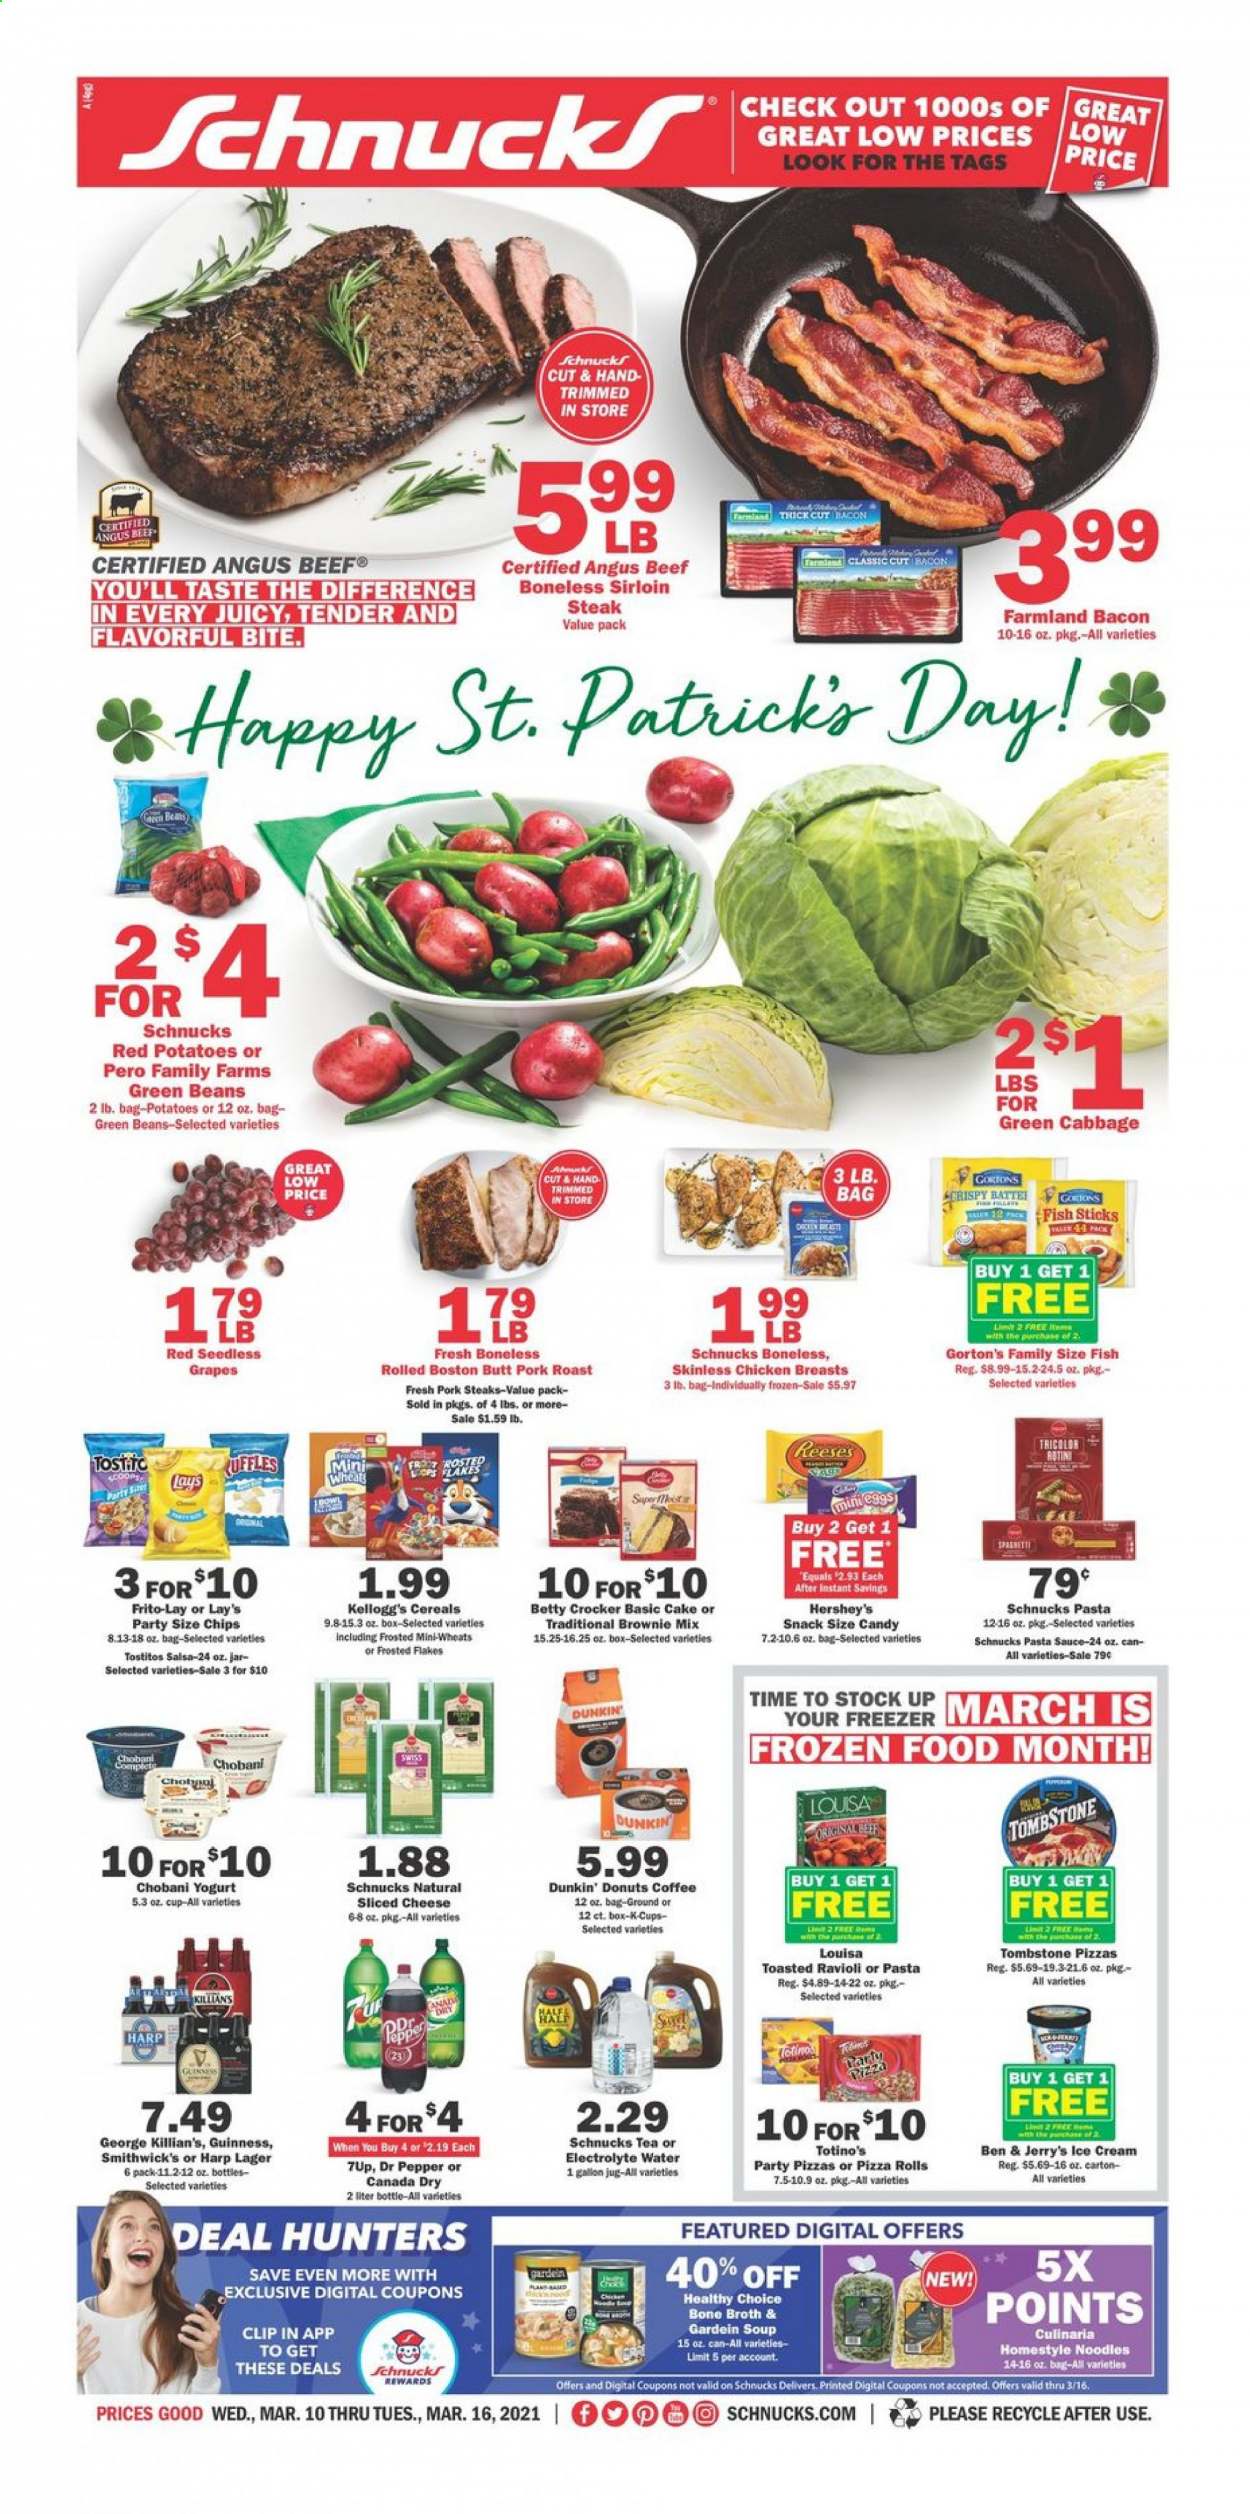 thumbnail - Schnucks Flyer - 03/10/2021 - 03/16/2021 - Sales products - green beans, seedless grapes, pizza rolls, brownie mix, cake, donut, Dunkin' Donuts, fish, Gorton's, pizza, soup, sauce, Healthy Choice, fish sticks, bacon, sliced cheese, cheese, yoghurt, Chobani, salsa, ice cream, Reese's, Hershey's, Ben & Jerry's, beans, Kellogg's, snack, Lay’s, Frito-Lay, Tostitos, broth, cereals, Frosted Flakes, ravioli, noodles, pasta sauce, Canada Dry, Dr. Pepper, 7UP, tea, coffee, coffee capsules, K-Cups, beer, Guinness, Lager, chicken breasts, beef meat, beef sirloin, steak, sirloin steak, pork chops, pork meat, pork roast. Page 1.